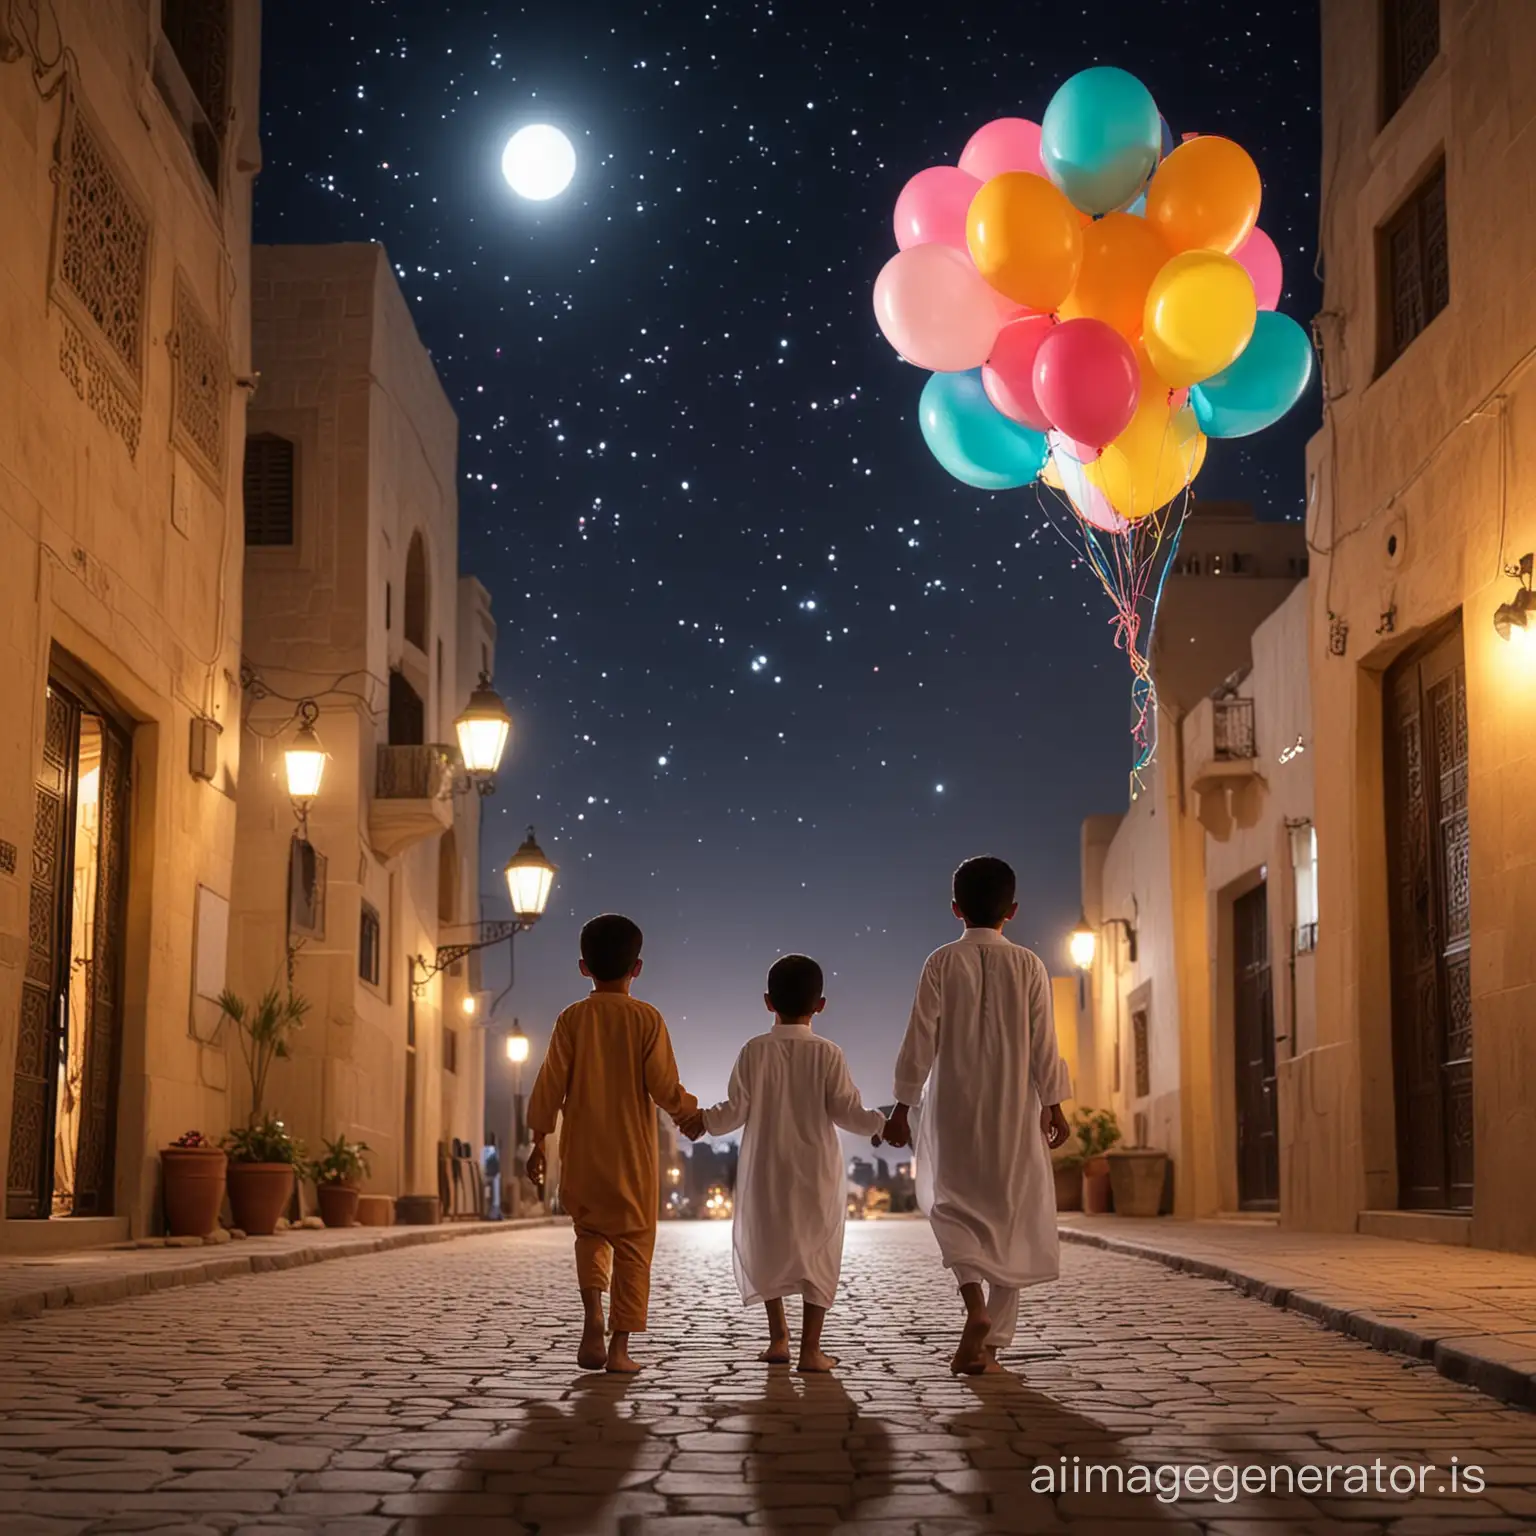 back view Joyful Arab Children Celebrating Eid ul Fitr with Balloons and Candy at Night  size 1920*960